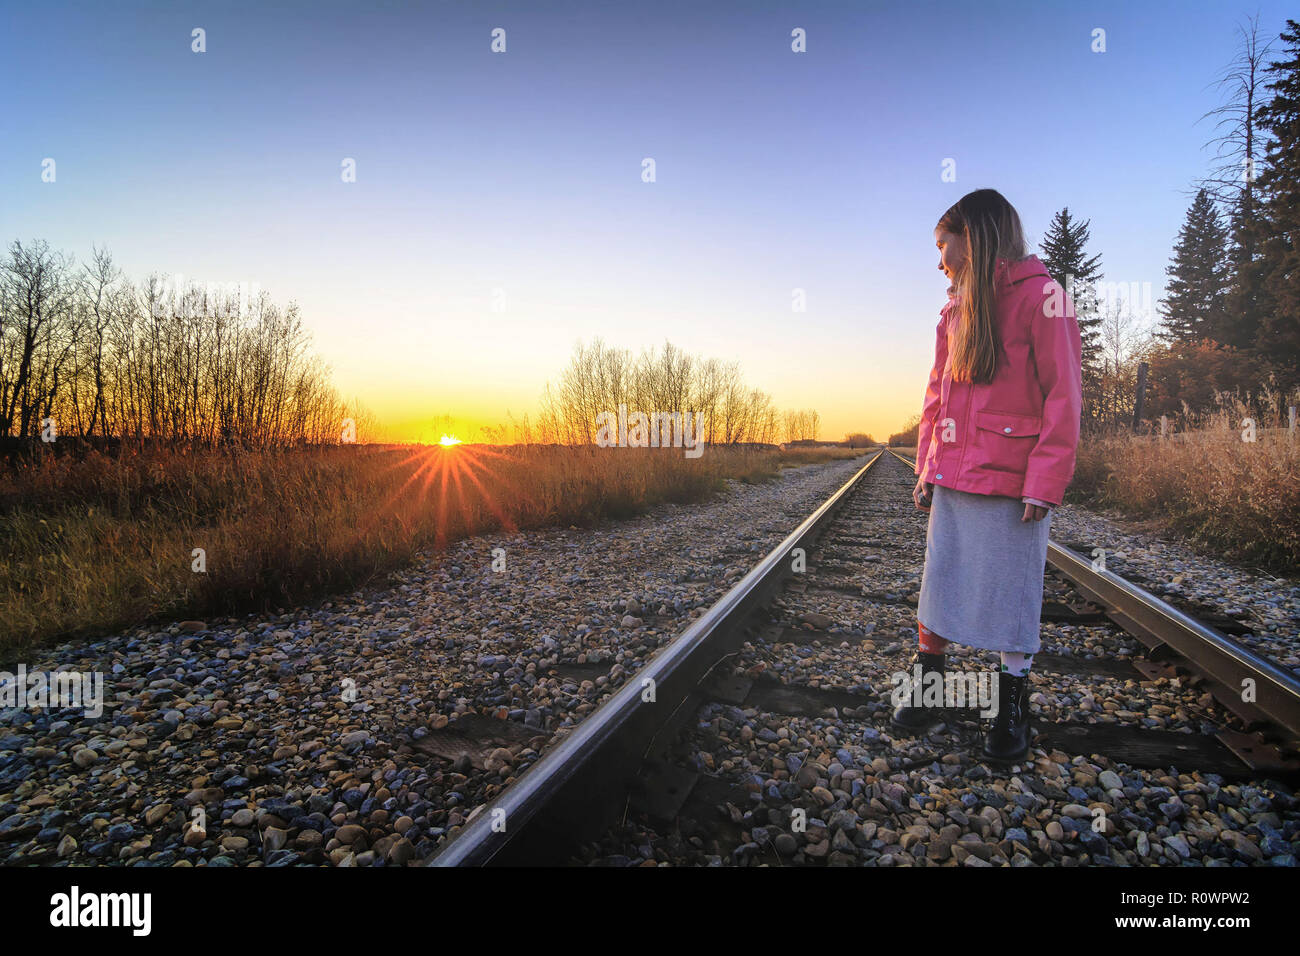 Girl Standing On Railroad Track High Resolution Stock Photography and ...